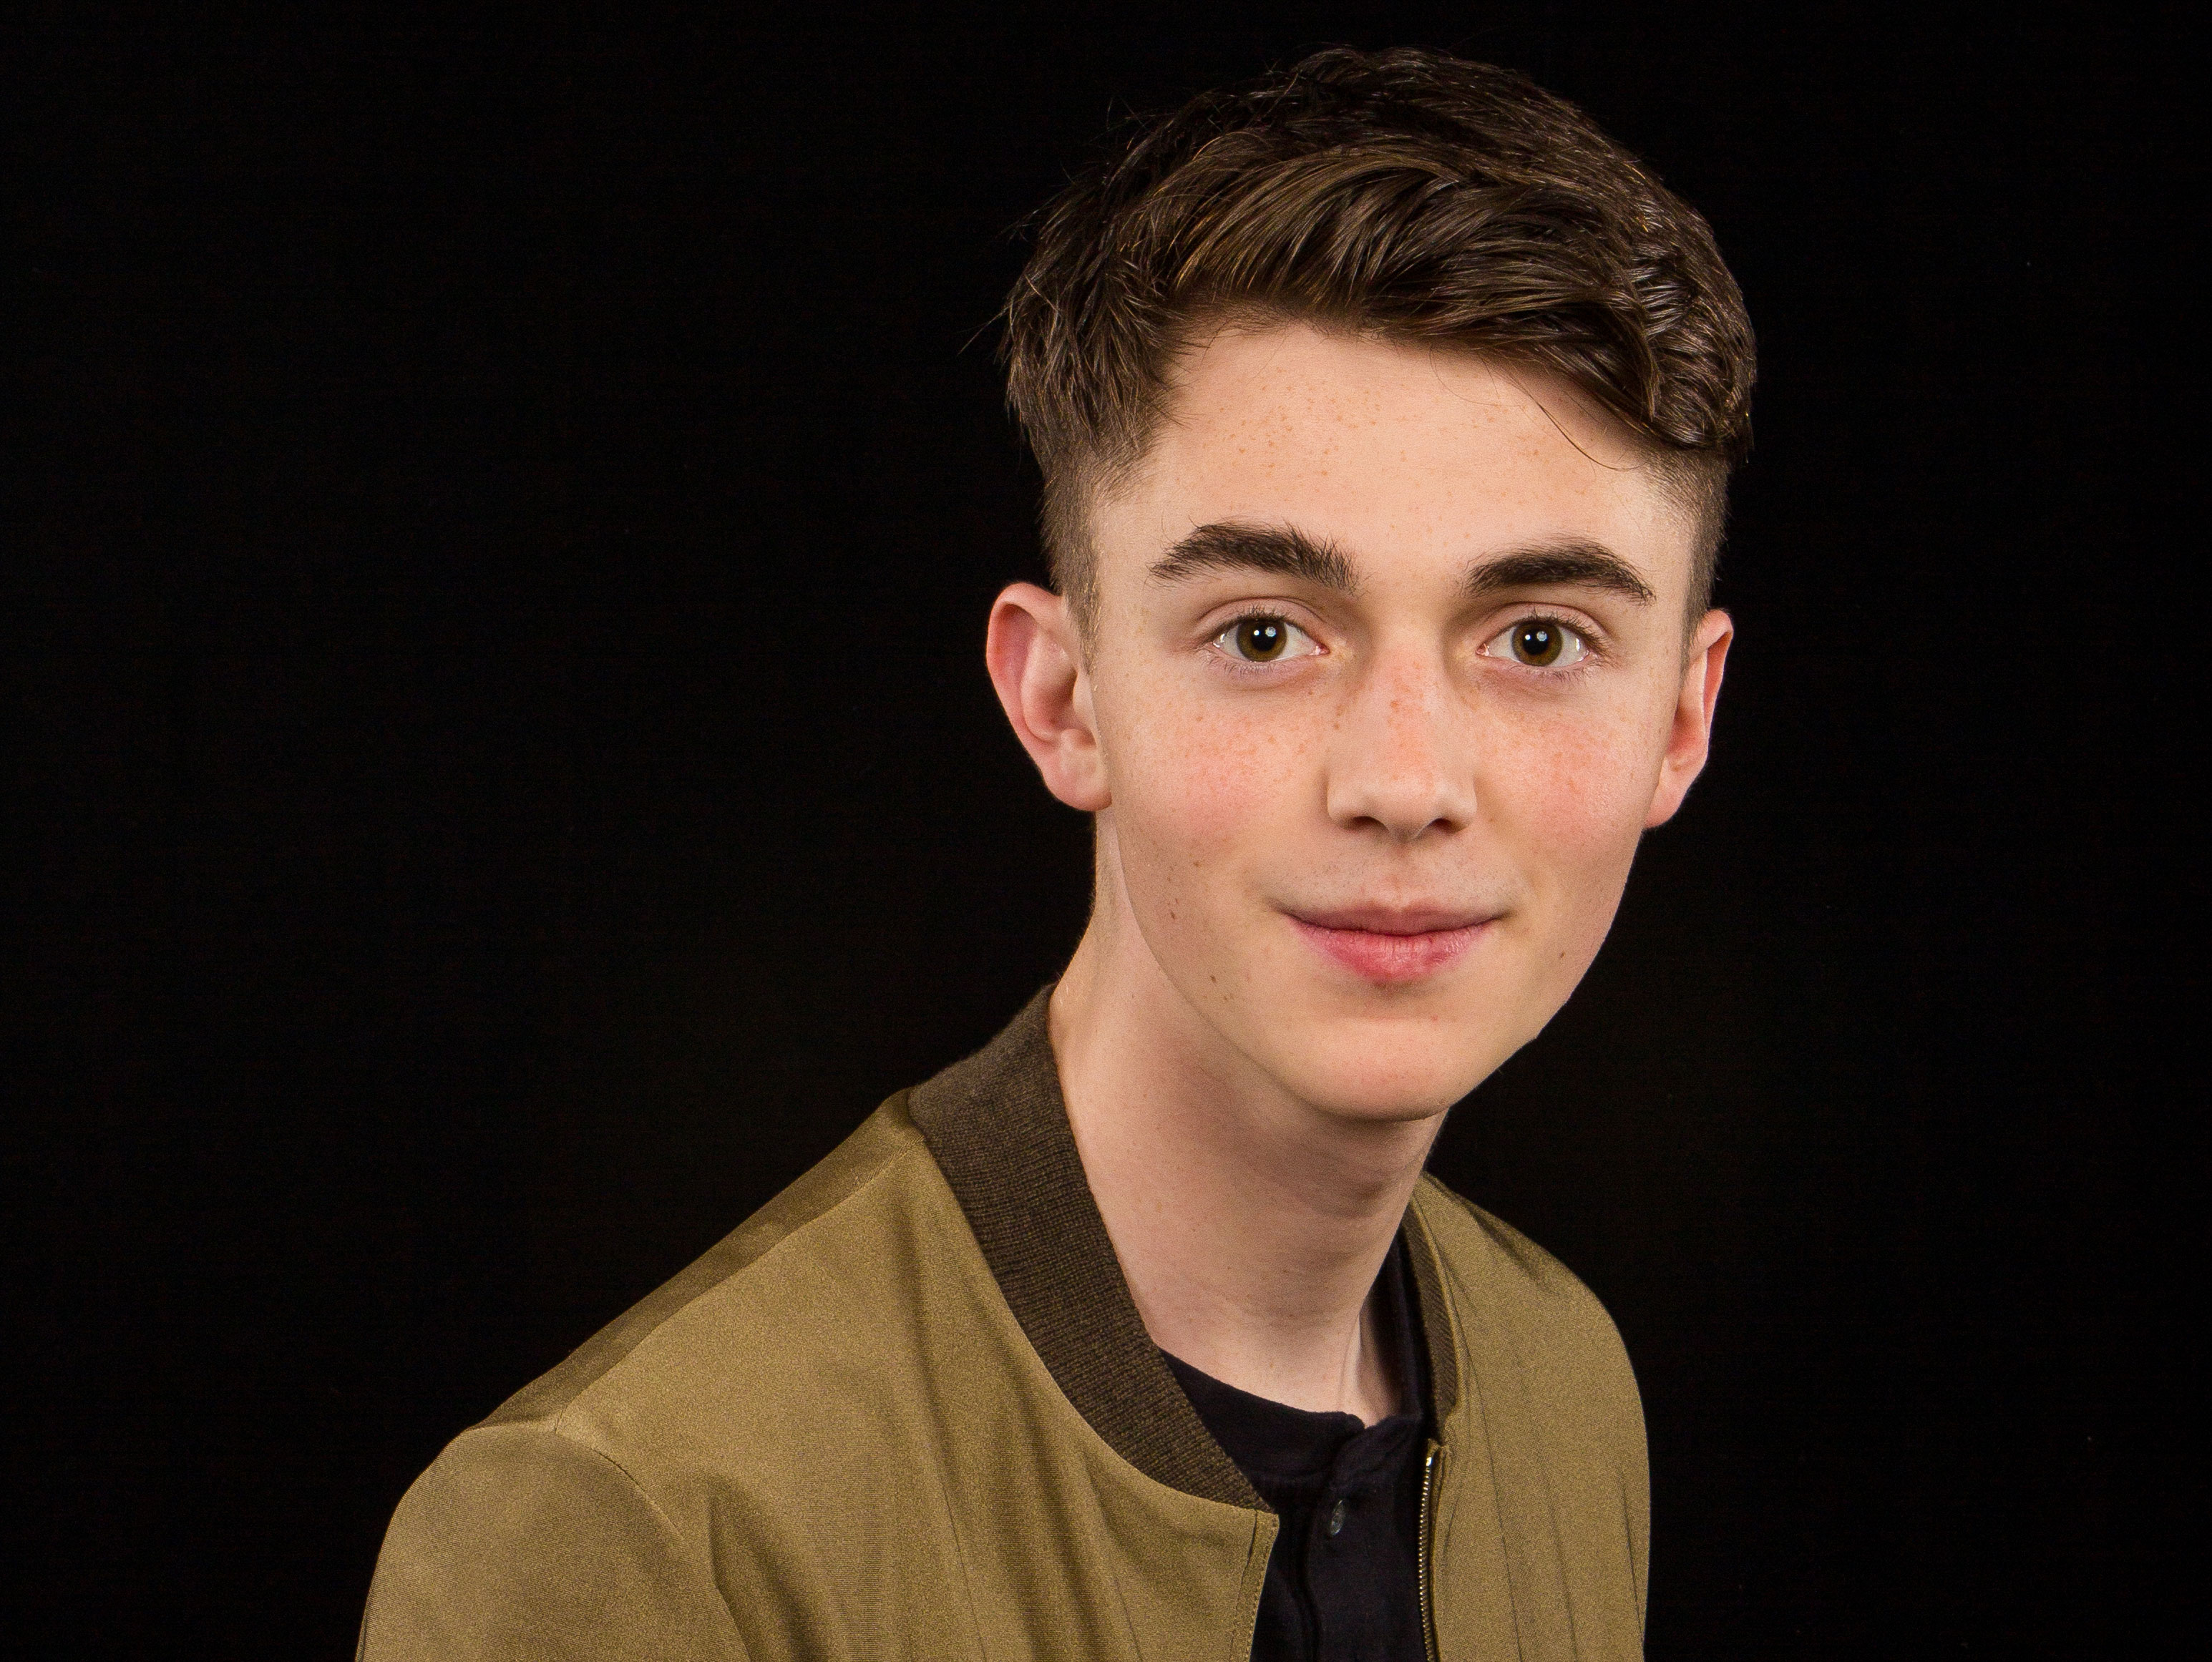 Greyson Chance Promotes His New Single ‘Hit & Run’ in the Big Apple ...